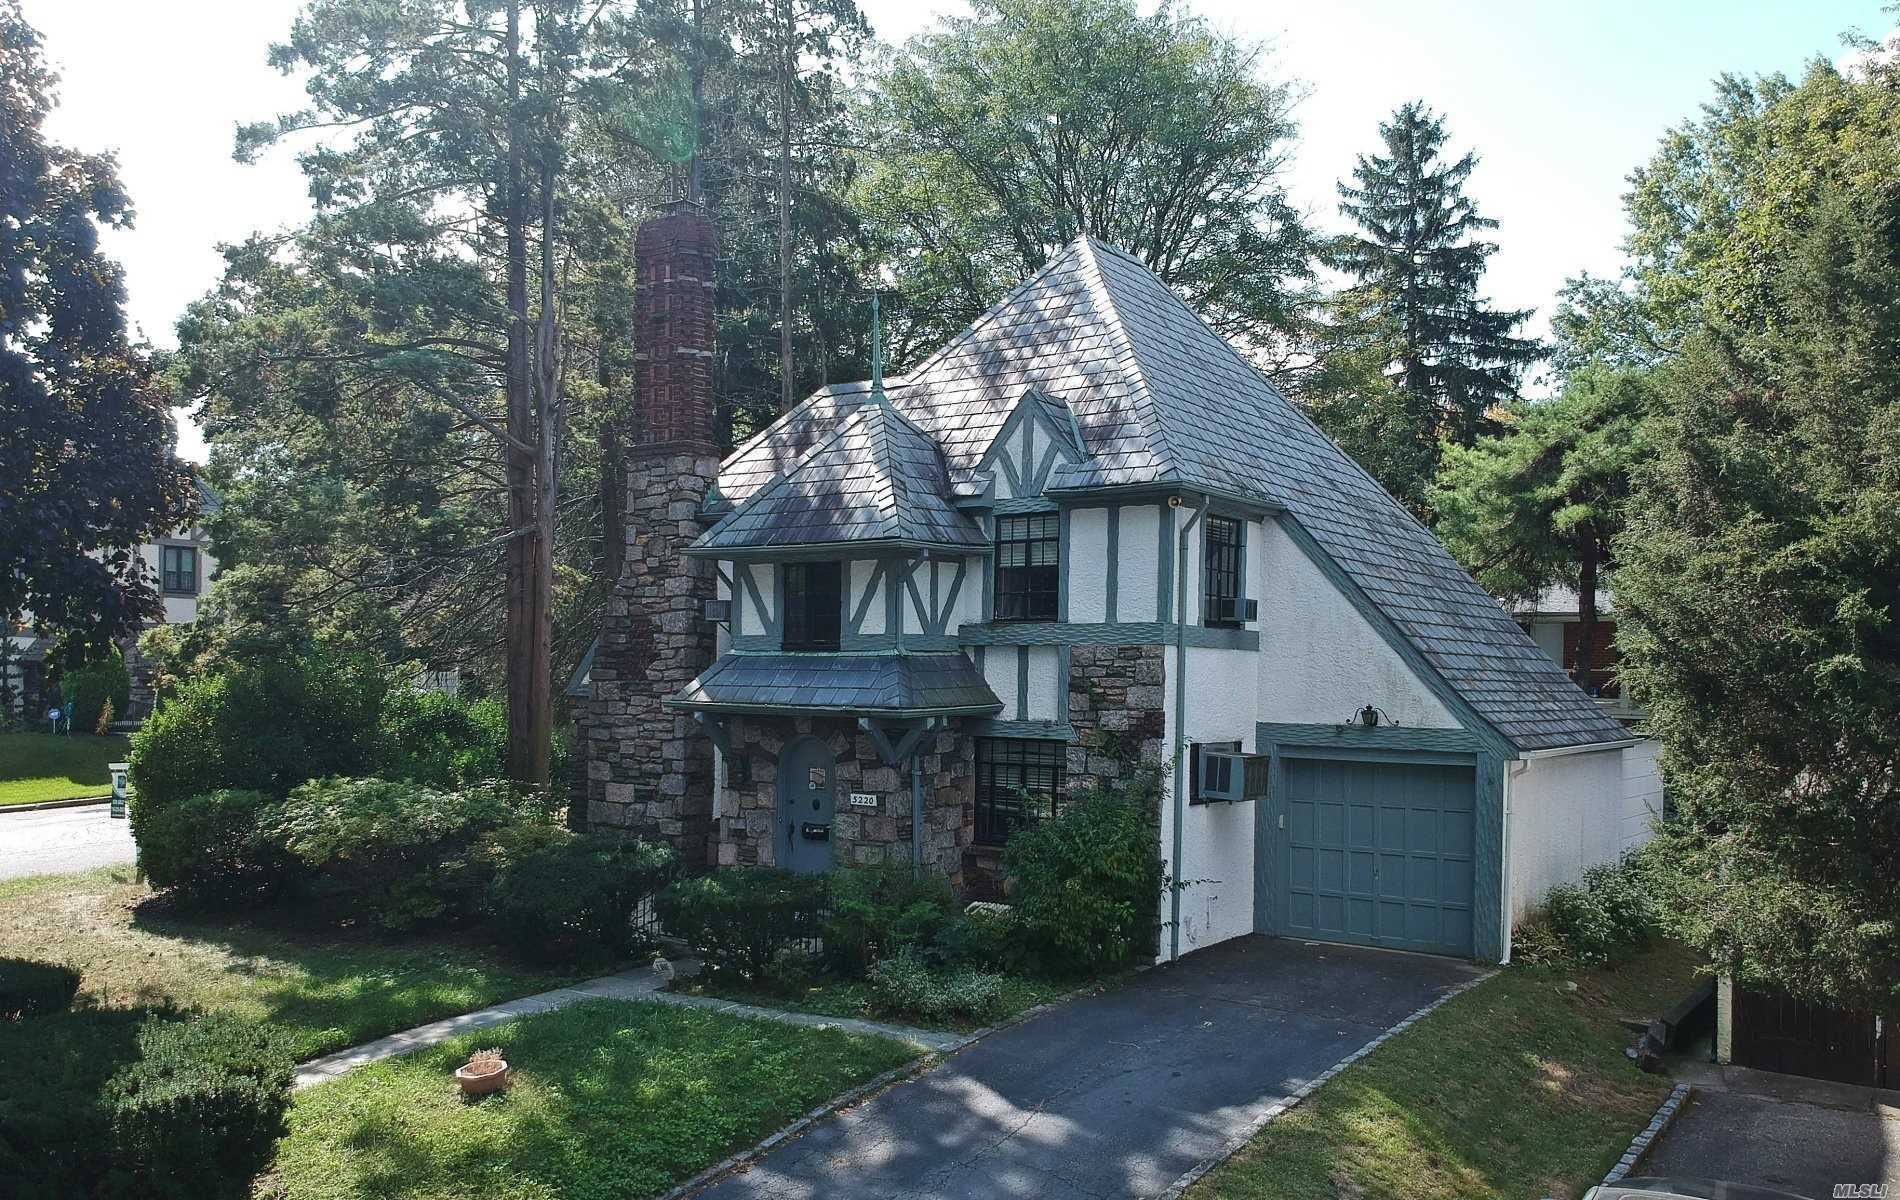 Newly Renovated Beautiful English Tudor in the heart of Little Neck. Oversized corner lot, Excellent layout with lots of character. Living rm w/wood burning frpl, formal Dining rm, separate den, large rooms throughout! Approved plans to add additional 1, 400sq ft! Conveniently located near LIRR, Bus, Shops, School & Park! SD#26. Must see!!